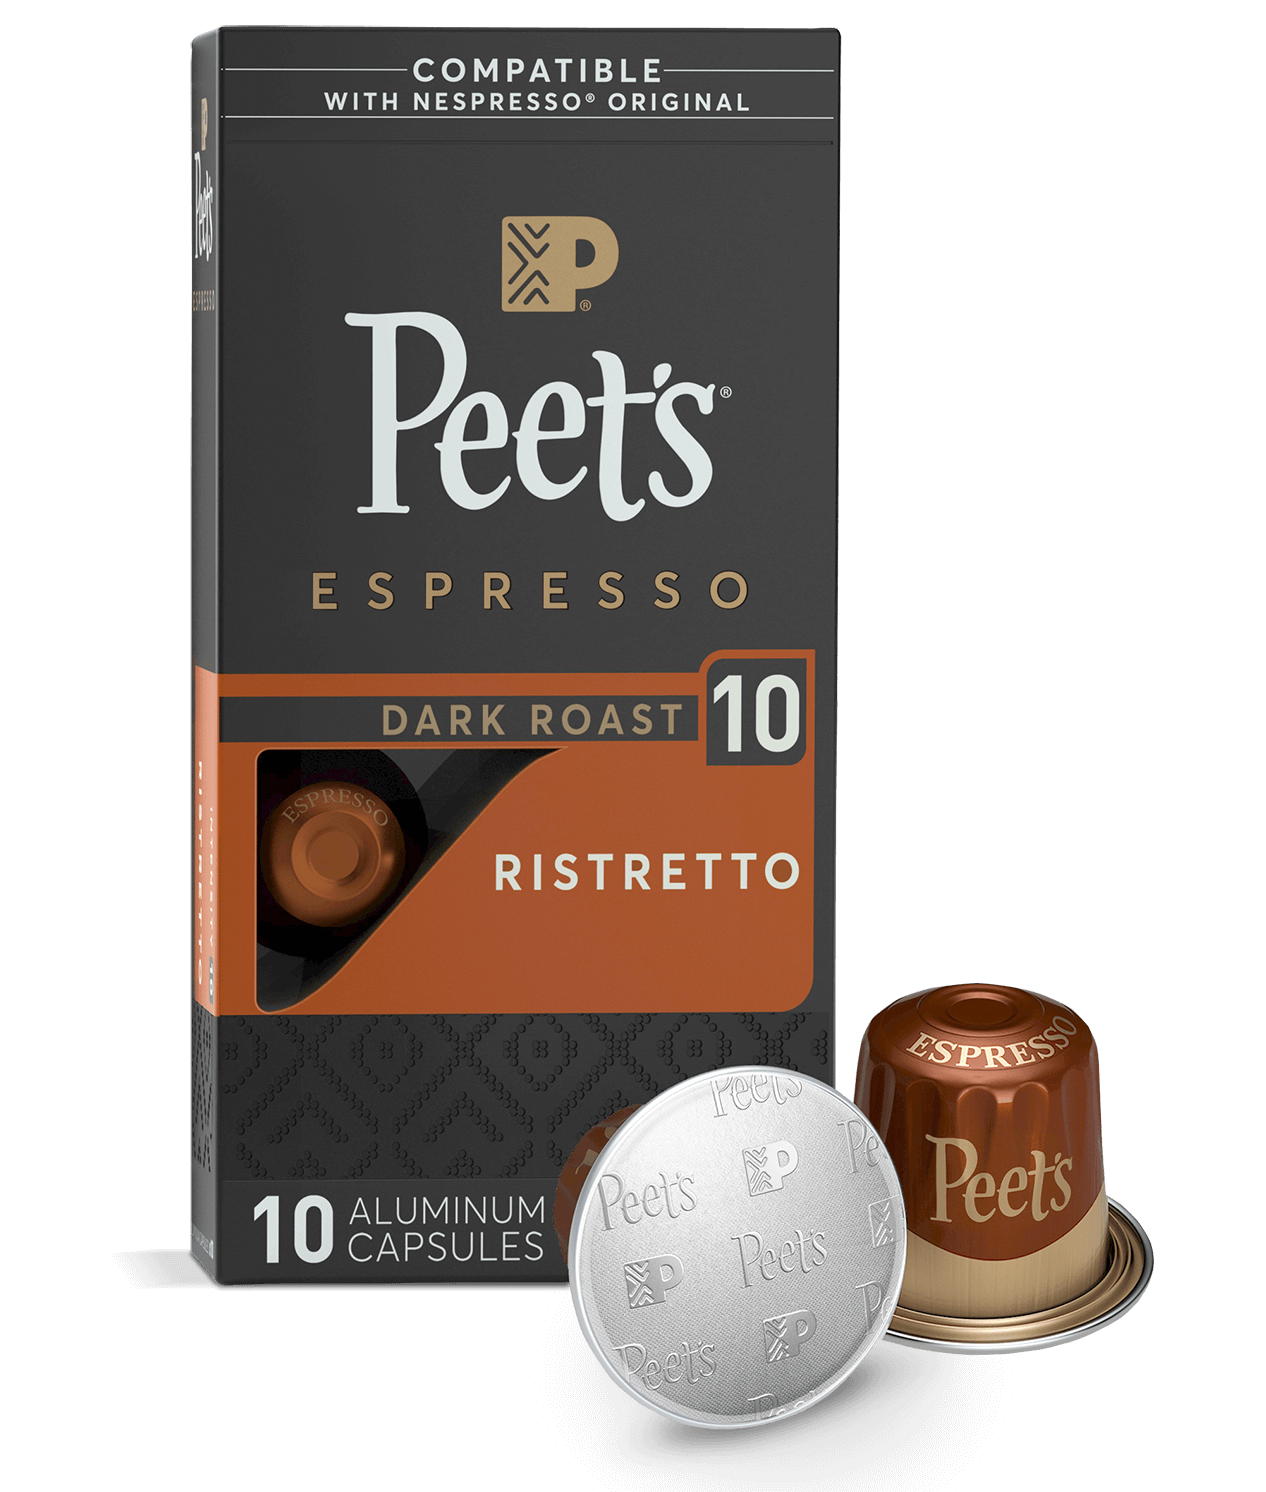 Is anyone else here a fan of L'Or pods? : r/nespresso